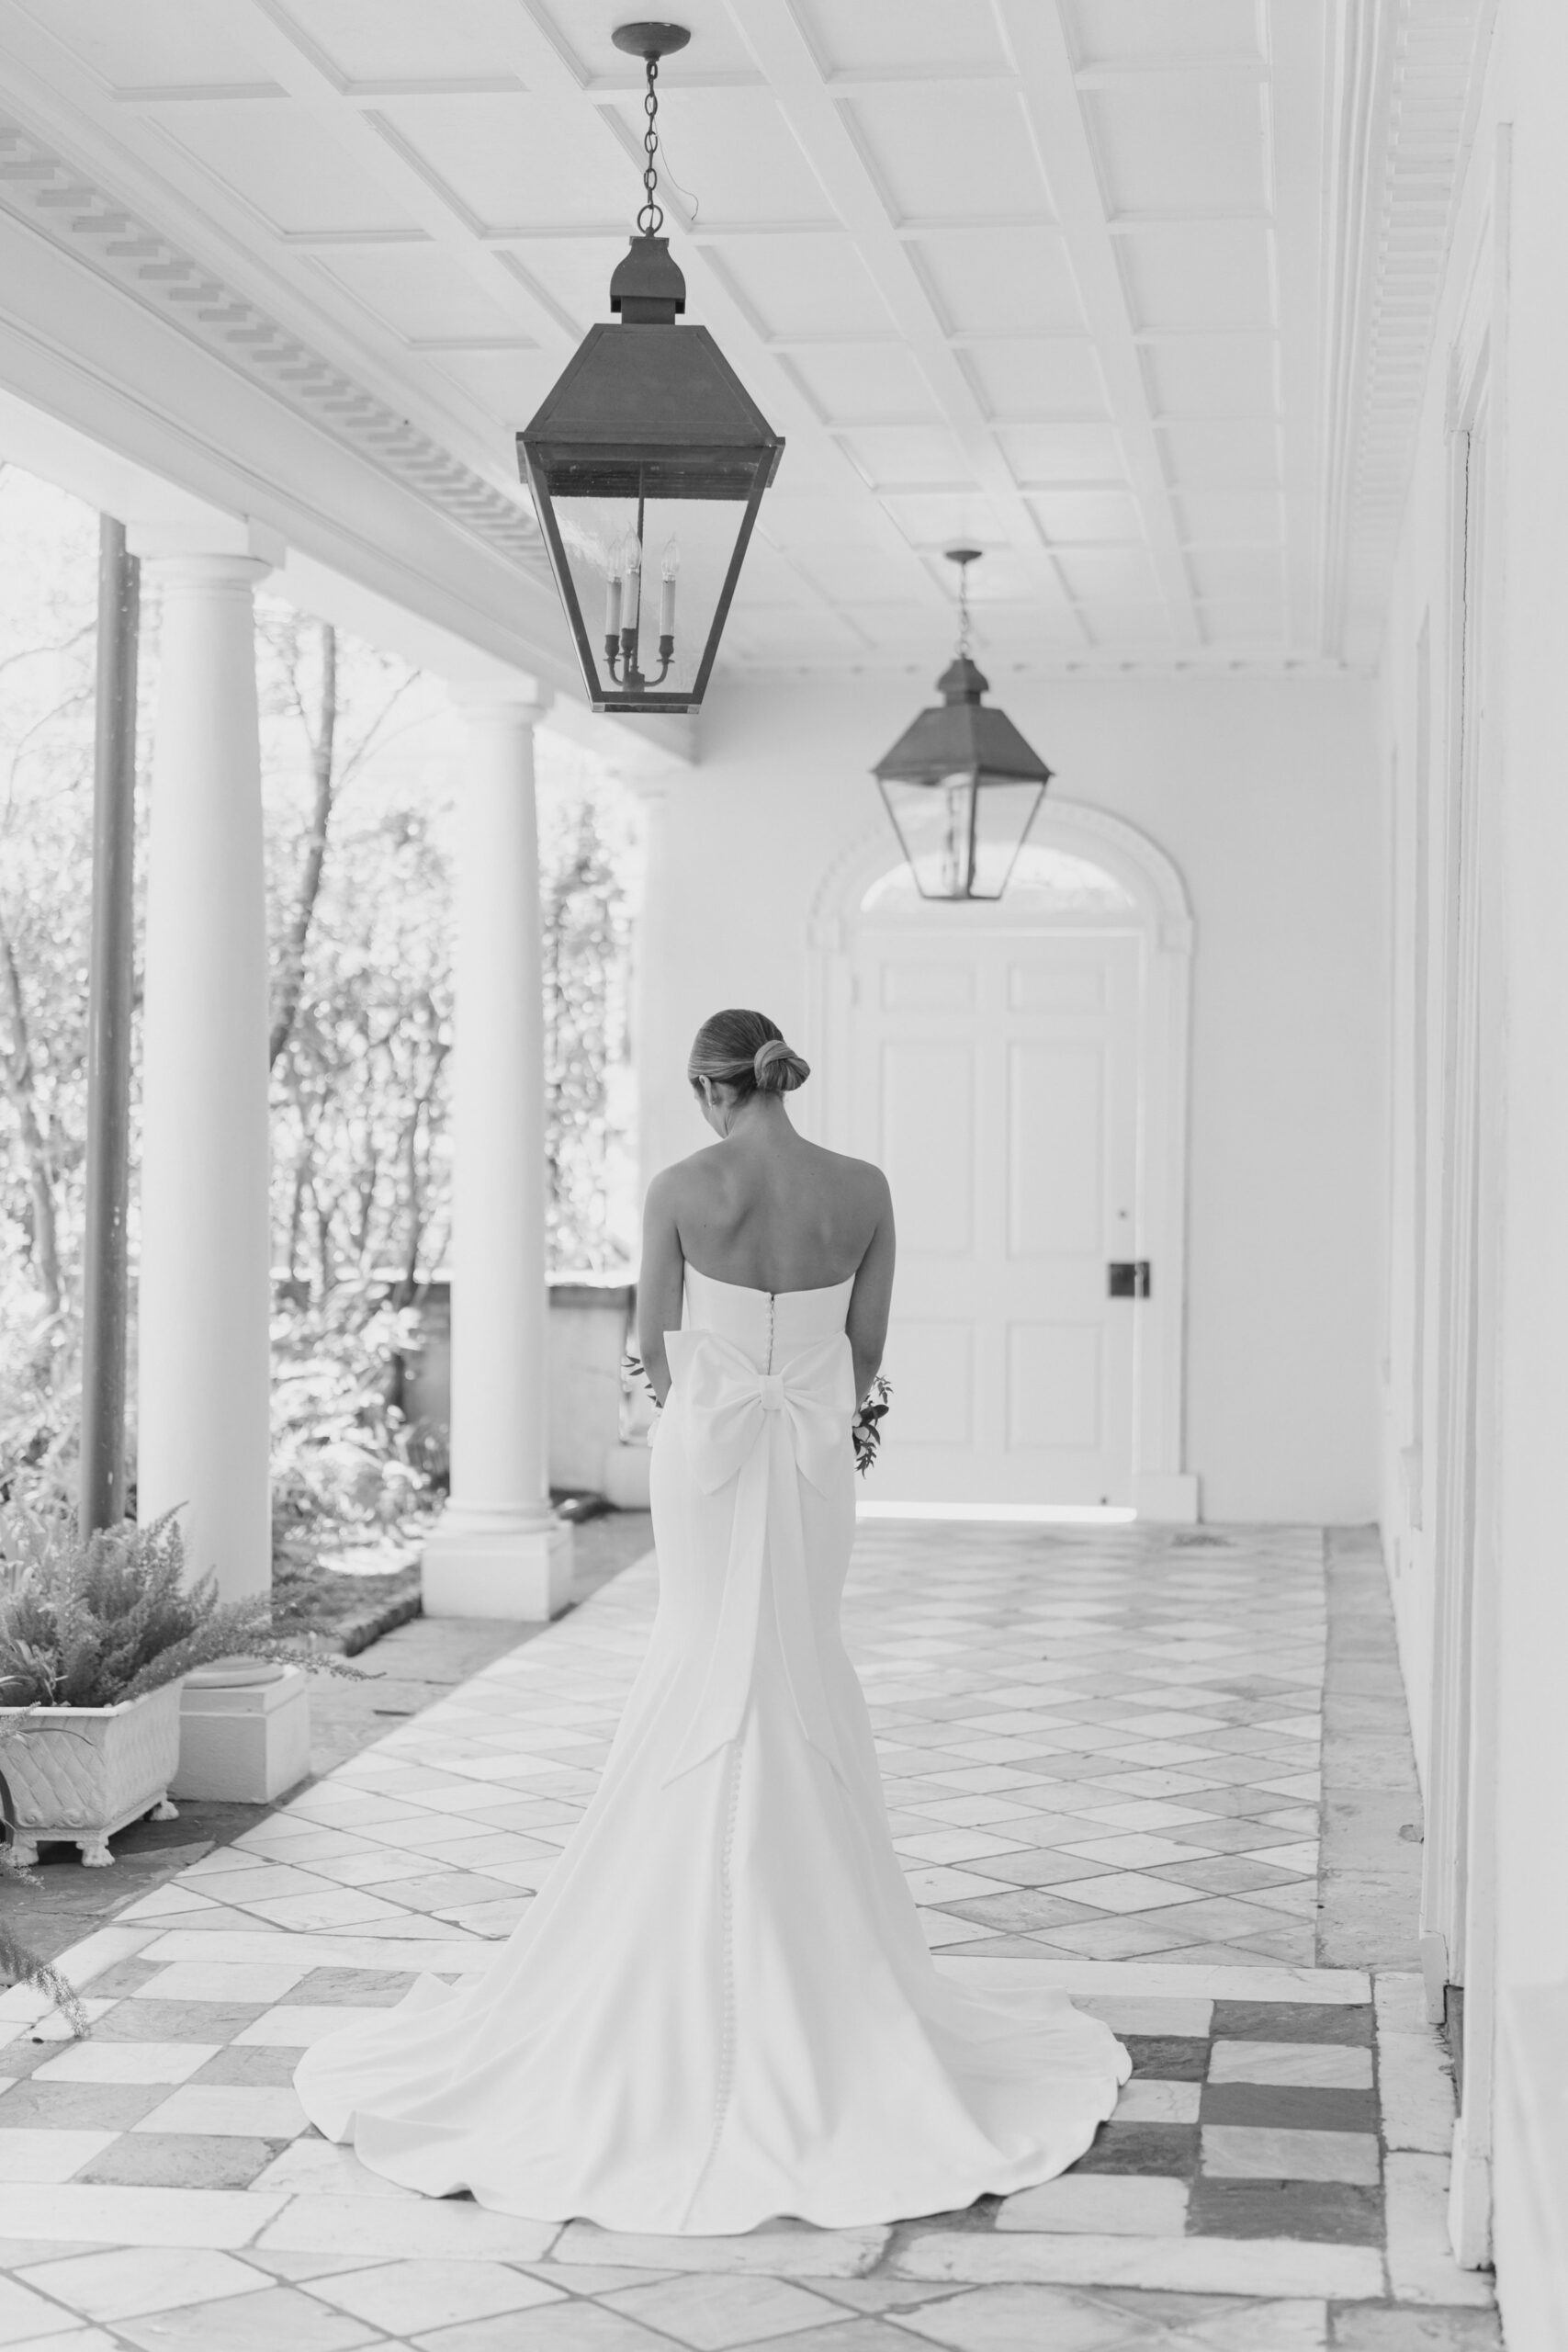 Black and white wedding day photo of bride.